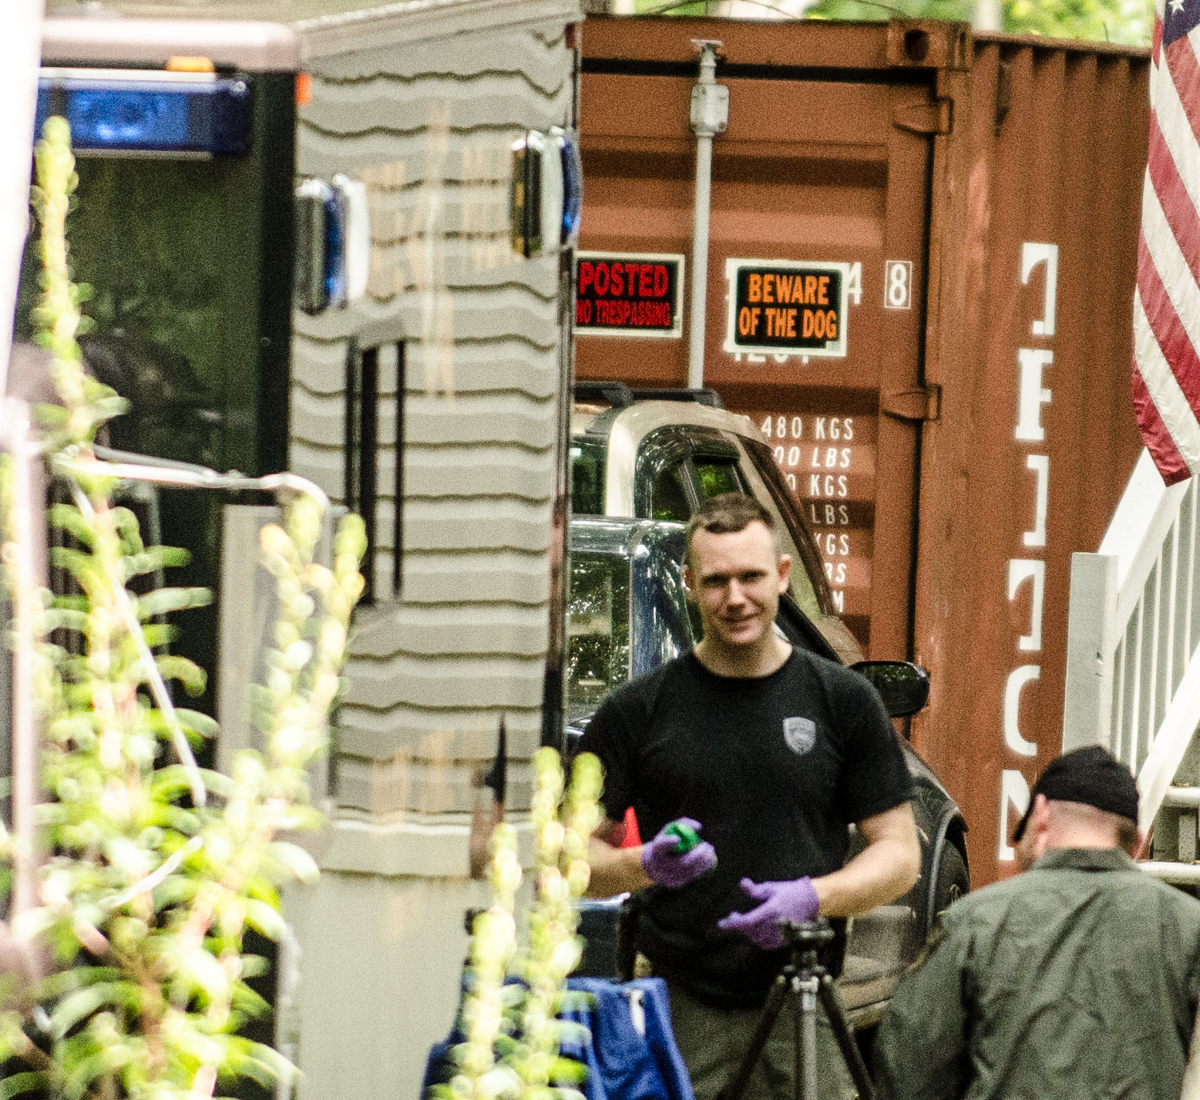 PHOTO: Police begin dismantling a shipping container outside the Gorham, NH home of Nathaniel Kibby 